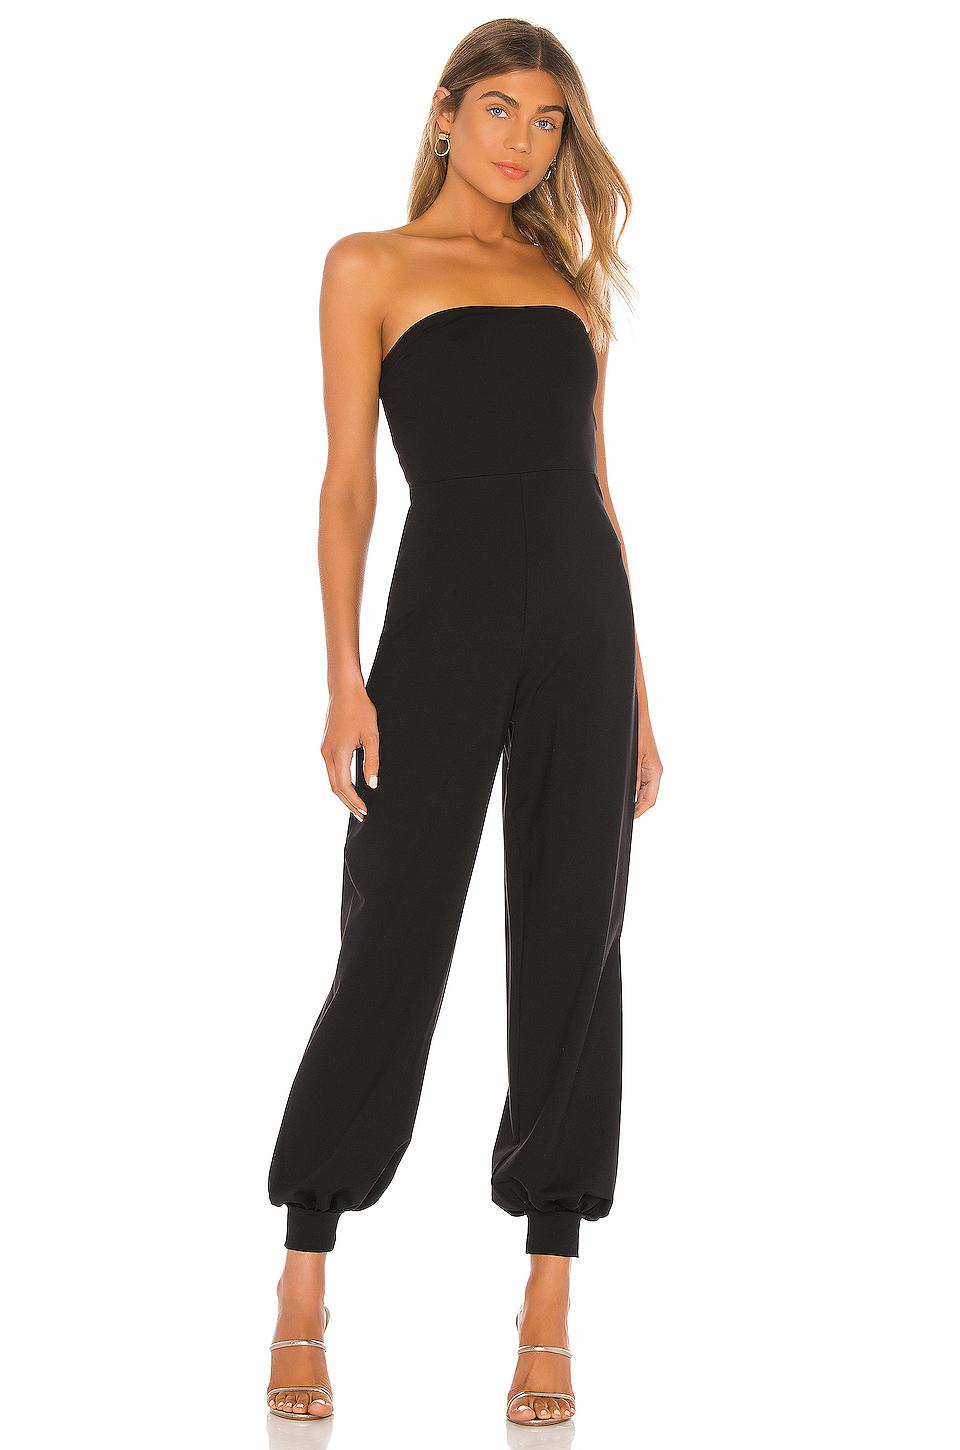 Susana Monaco Synthetic Strapless Cuffed Ankle Jumpsuit in Black - Lyst